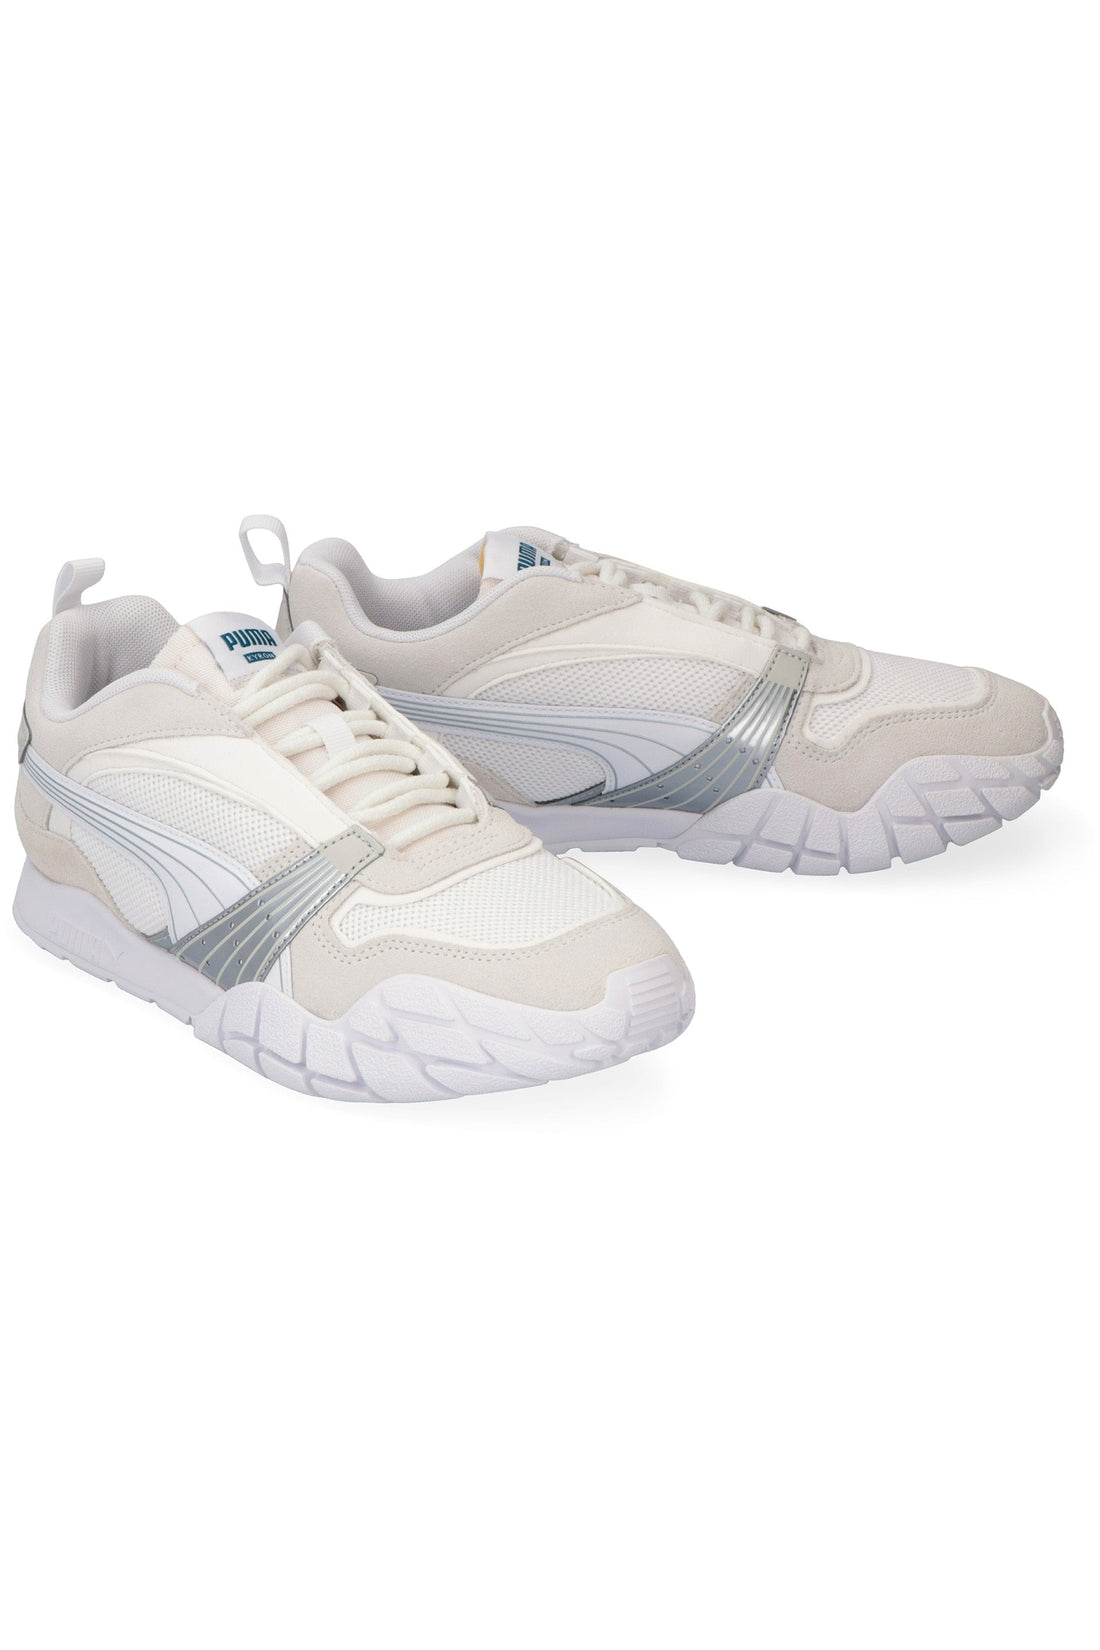 Puma-OUTLET-SALE-Kyron Wild Beasts sneakers-ARCHIVIST